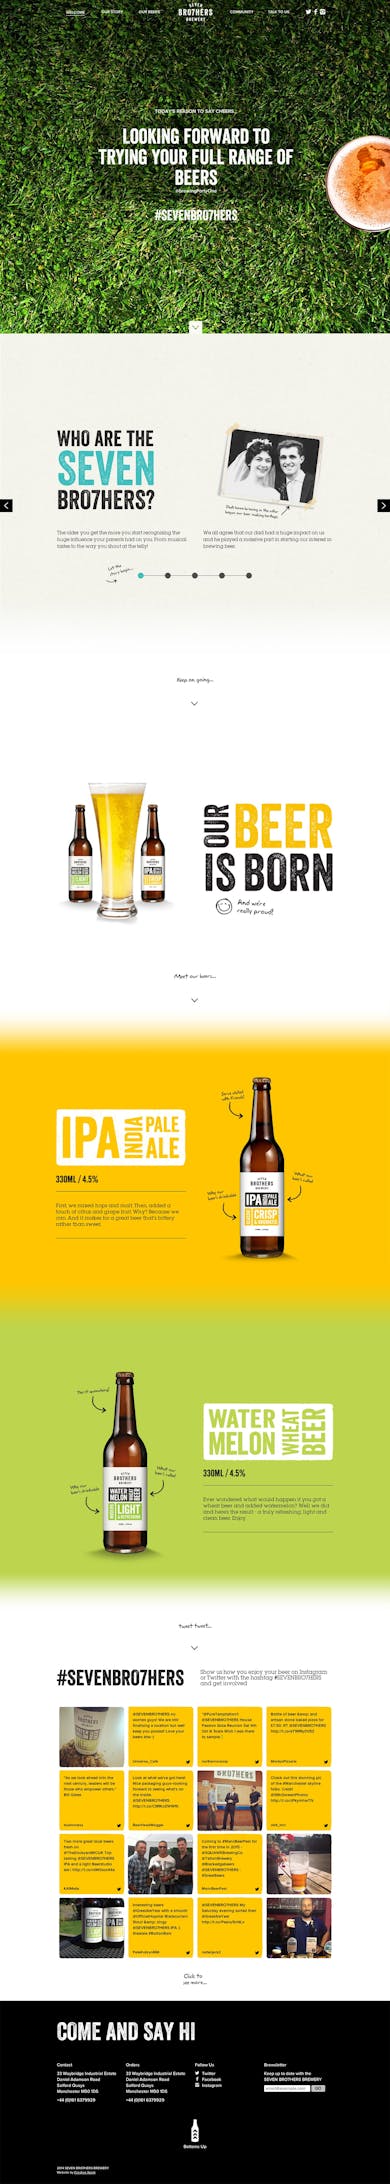 Seven Bro7hers Brewery Thumbnail Preview